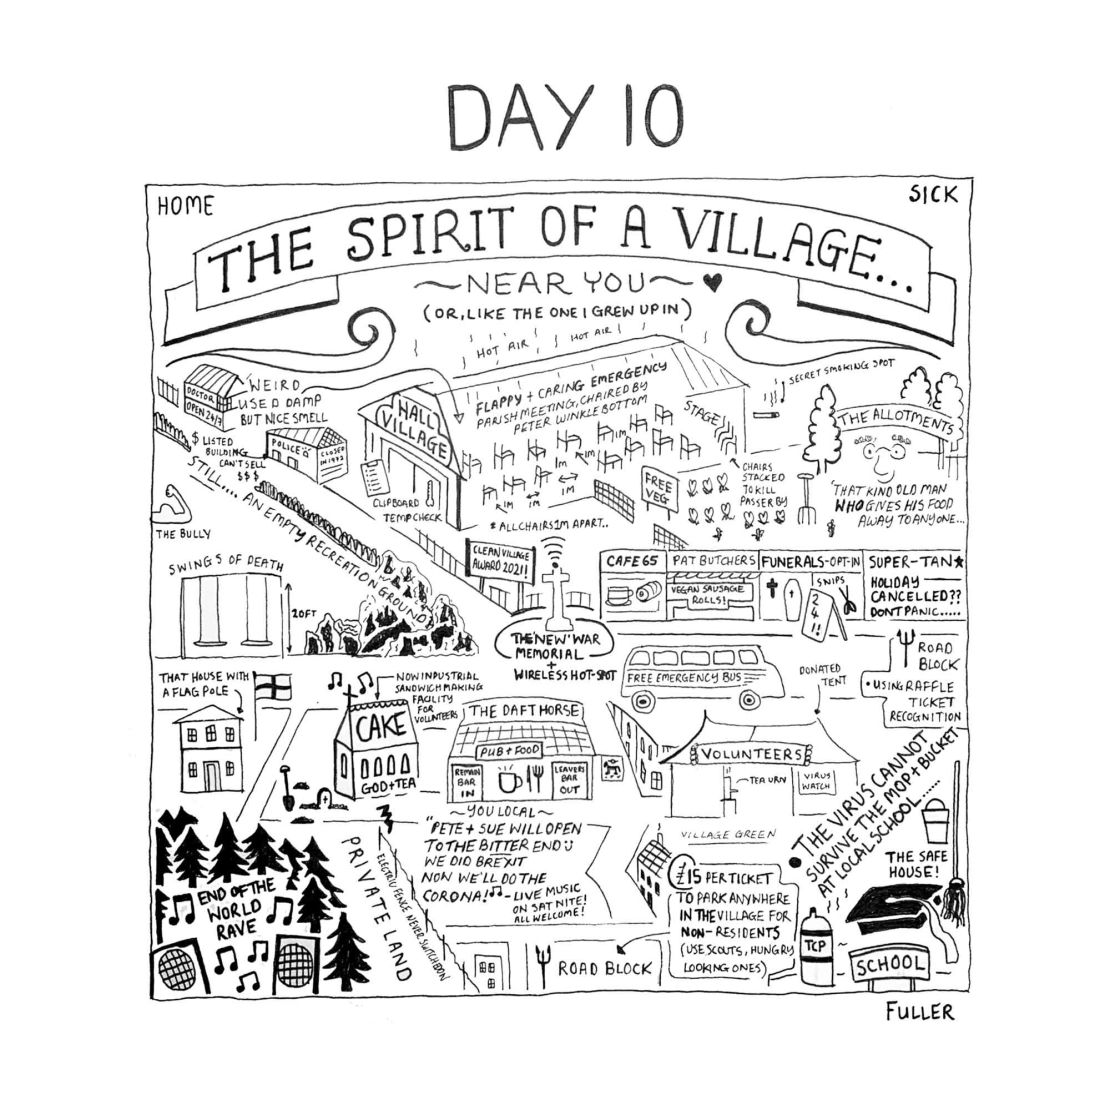 Day 10 is an imaginary depiction of a village coming together to tackle the virus -- there's an "end of world rave" in one corner while an emergency medical bus roams around town.